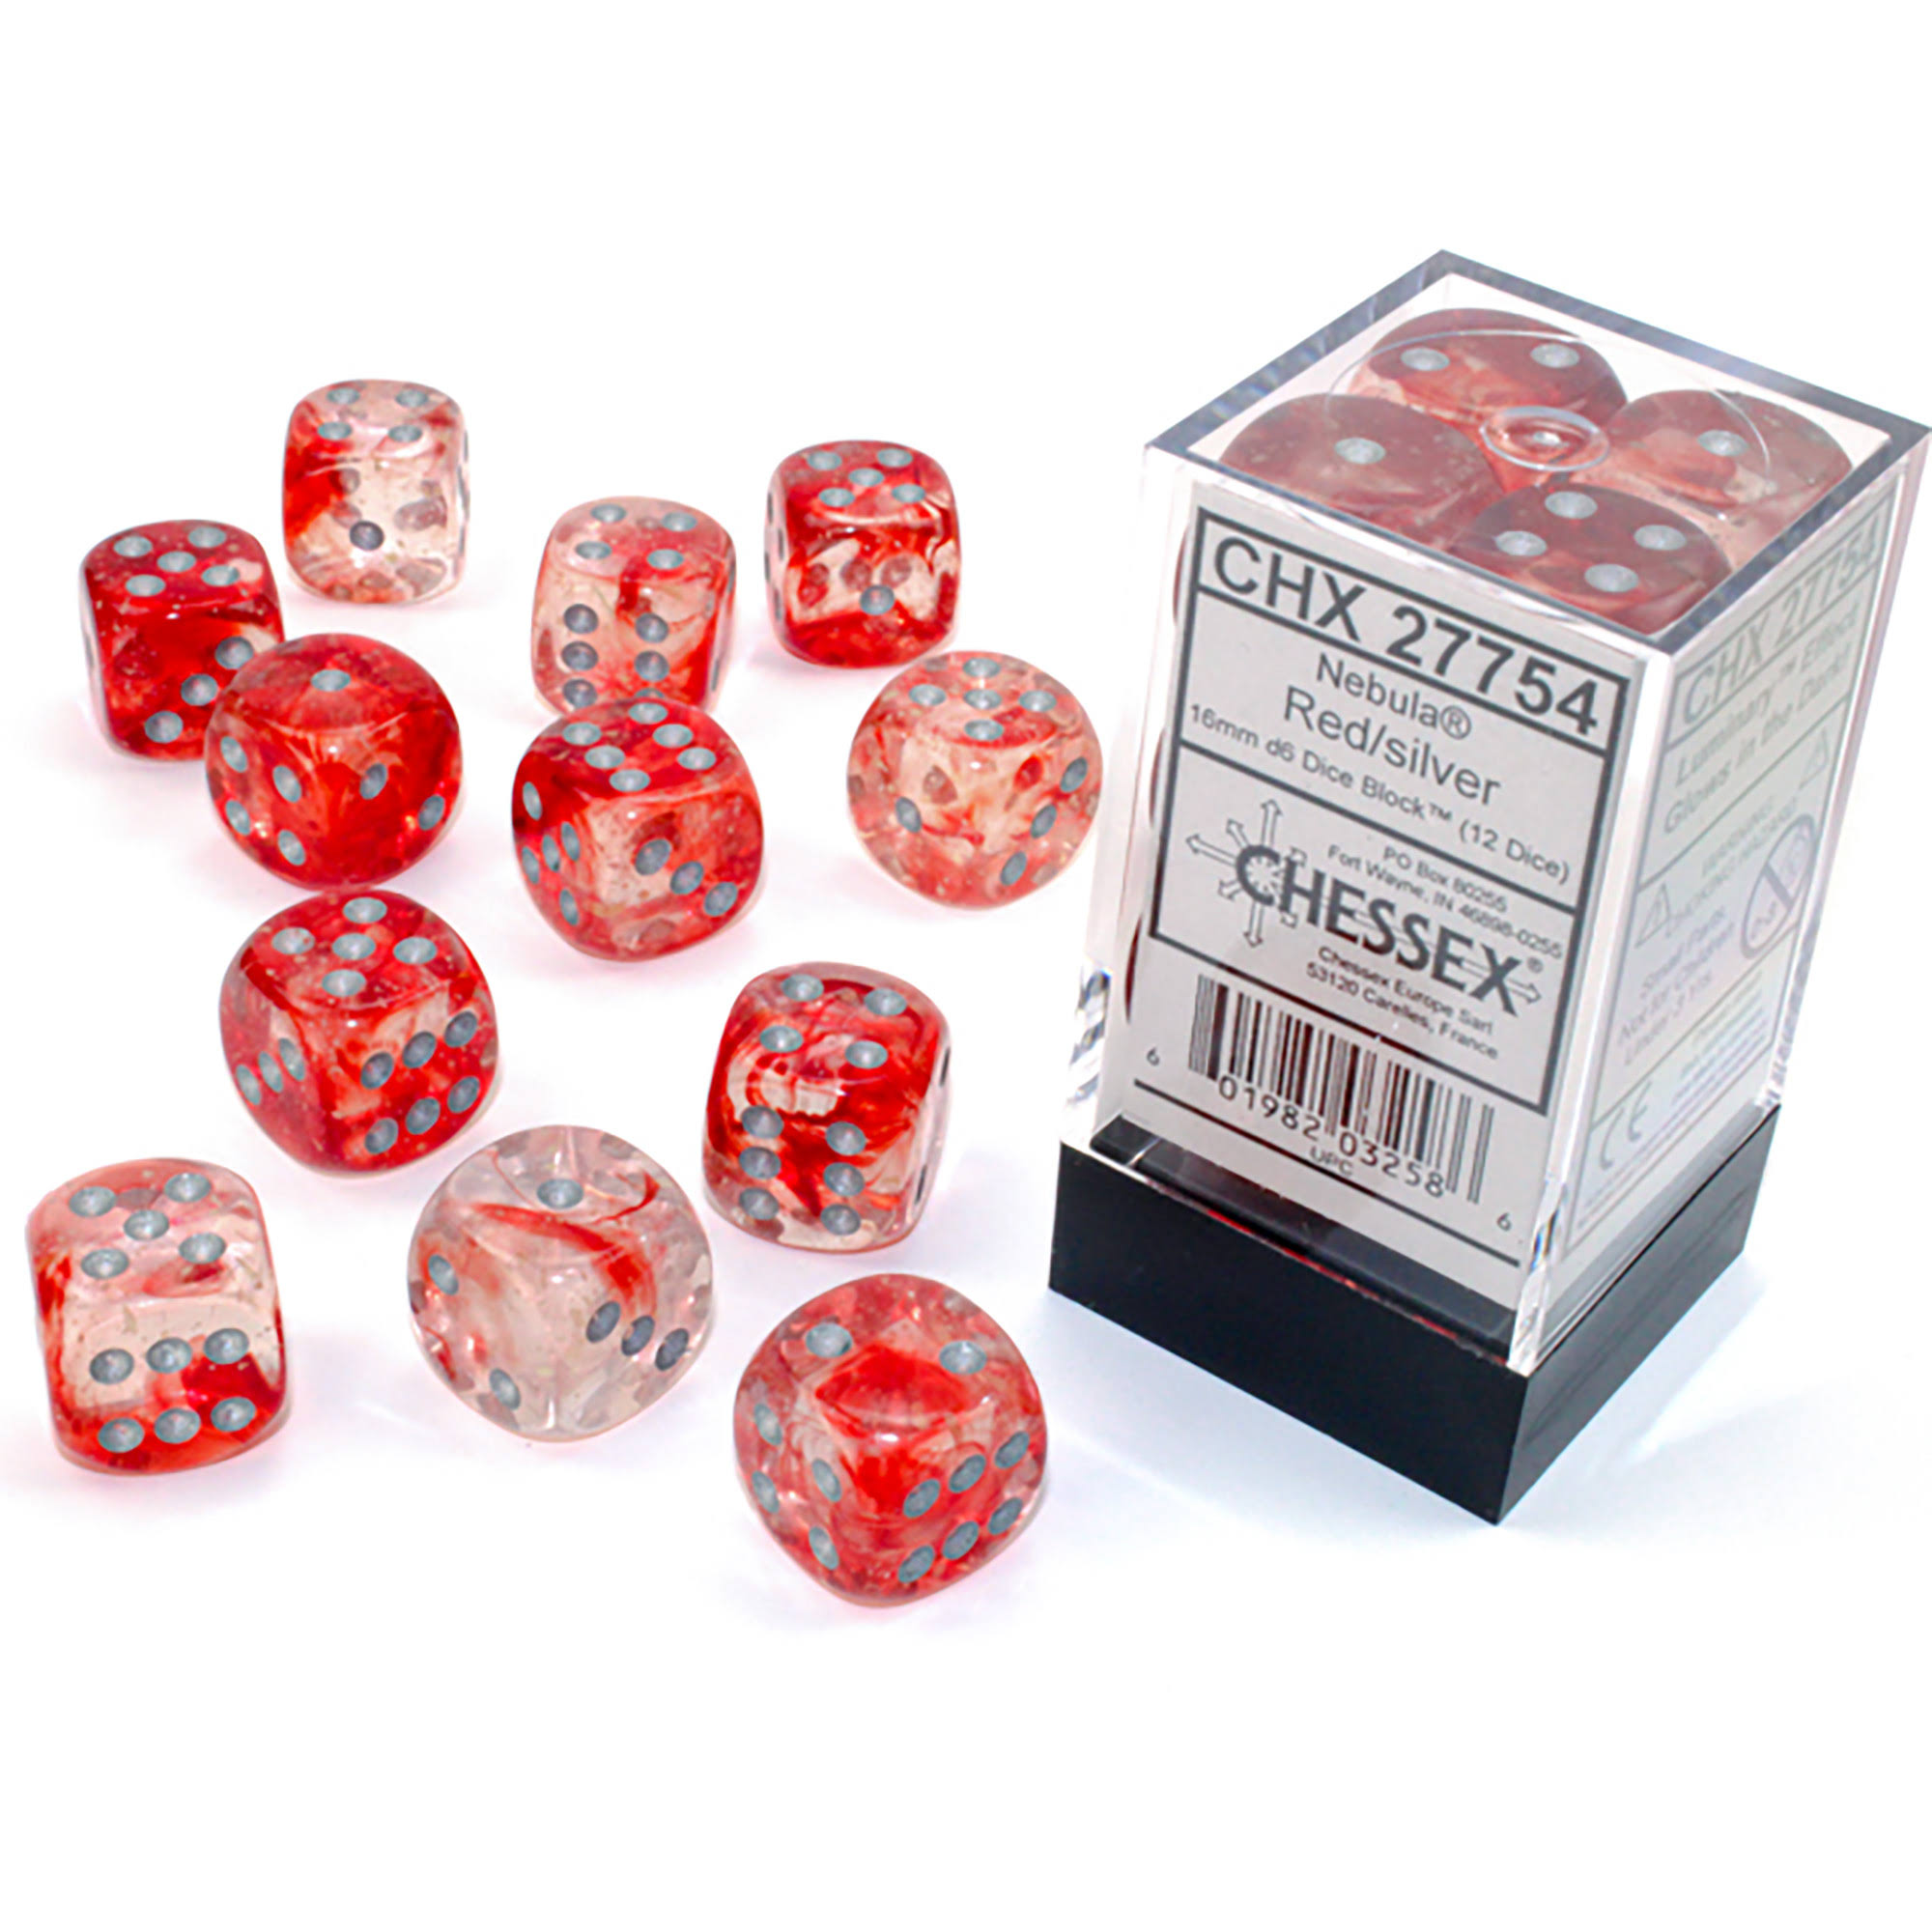 Chessex Nebula Red Silver 16mm D6 Dice 12 Dice